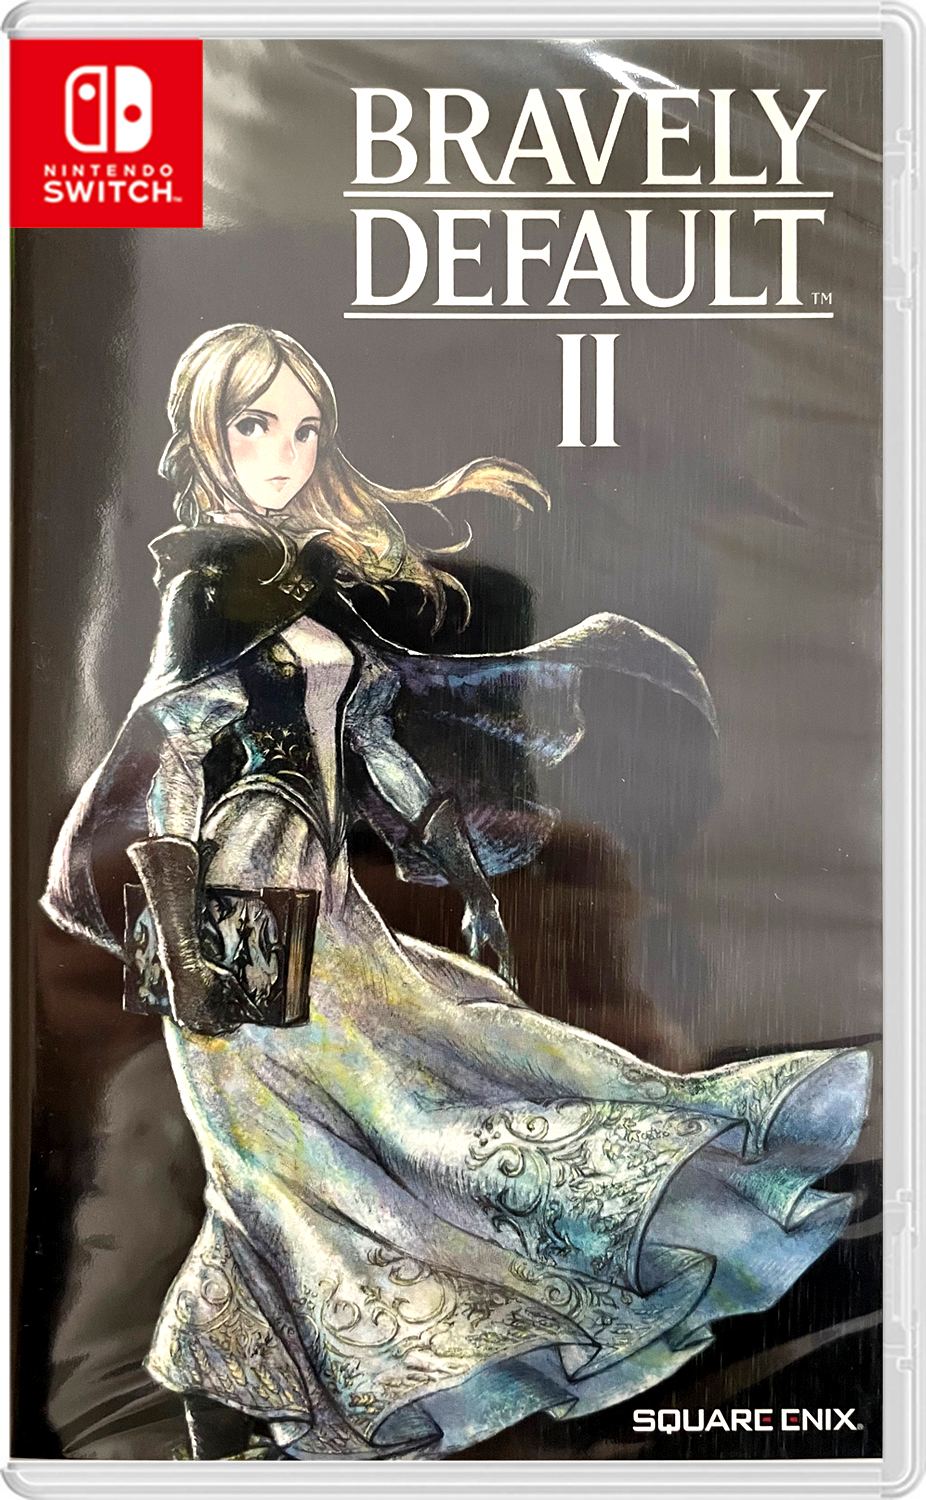 Bravely Default II (English) for Switch Nintendo